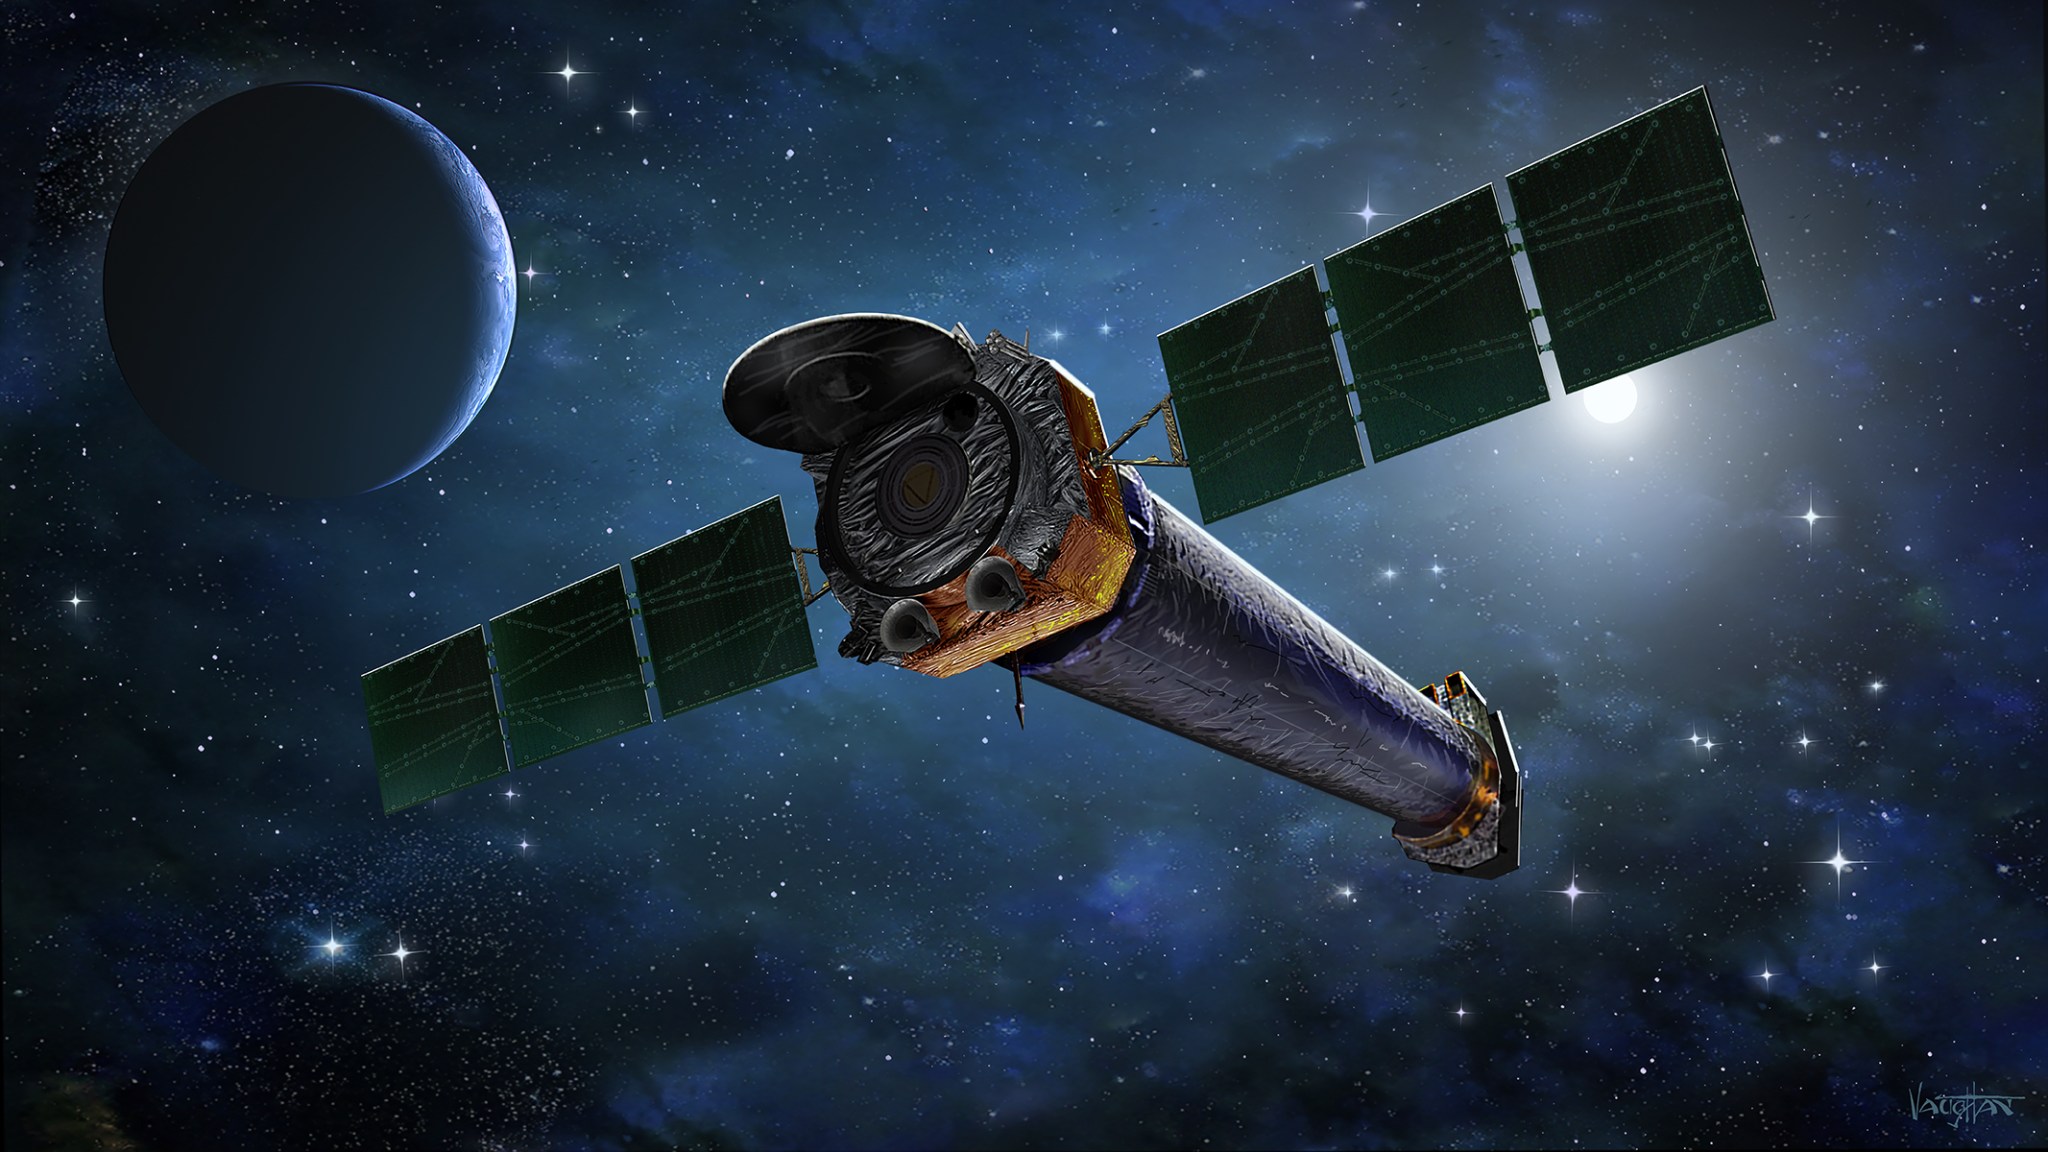 Illustration of the Chandra X-ray Observatory.